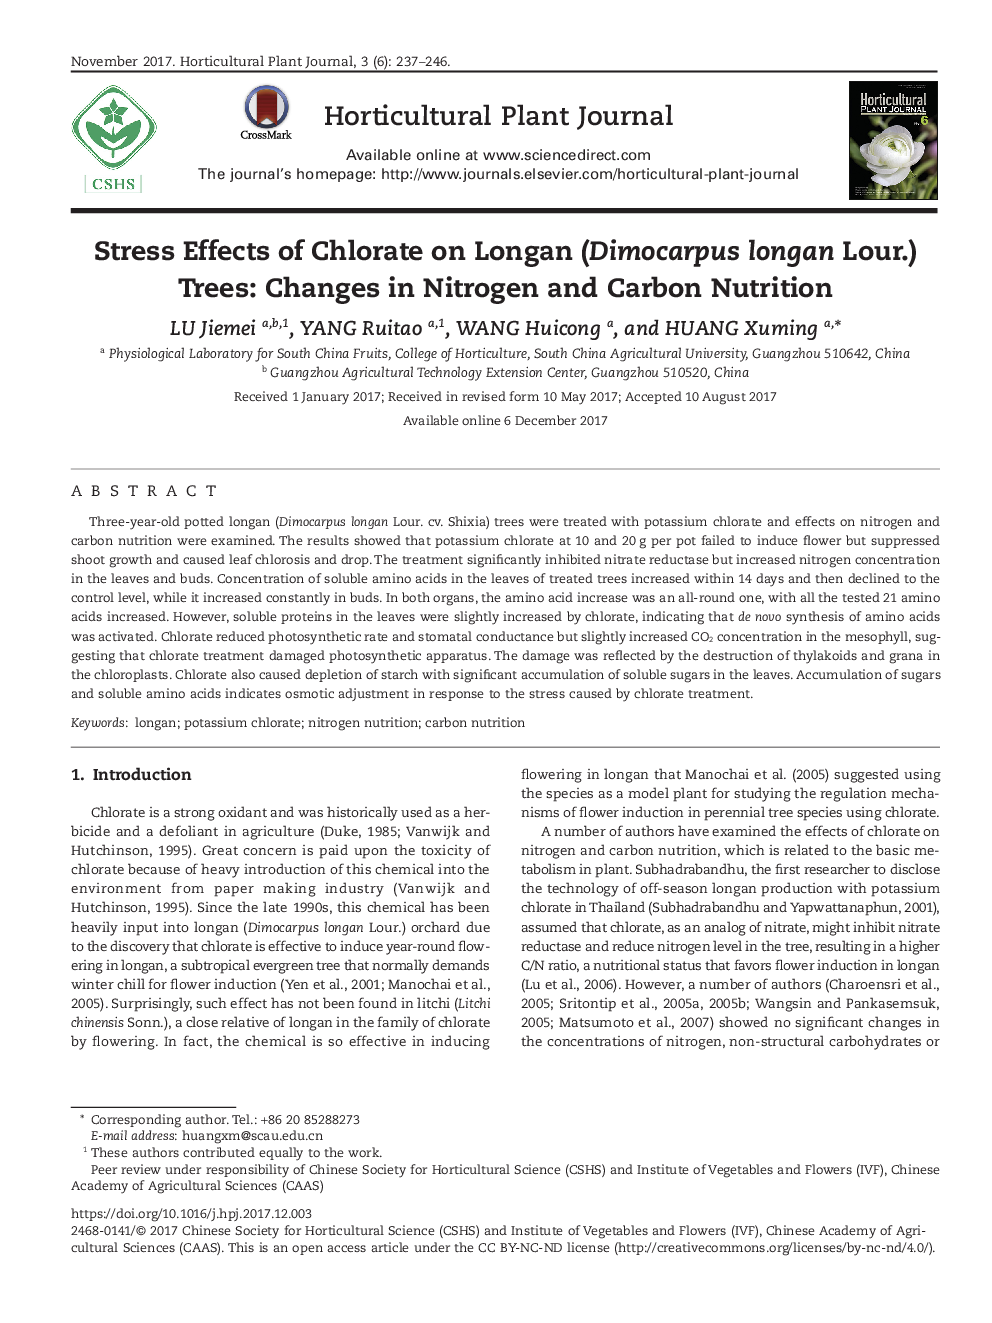 Stress Effects of Chlorate on Longan (Dimocarpus longan Lour.) Trees: Changes in Nitrogen and Carbon Nutrition